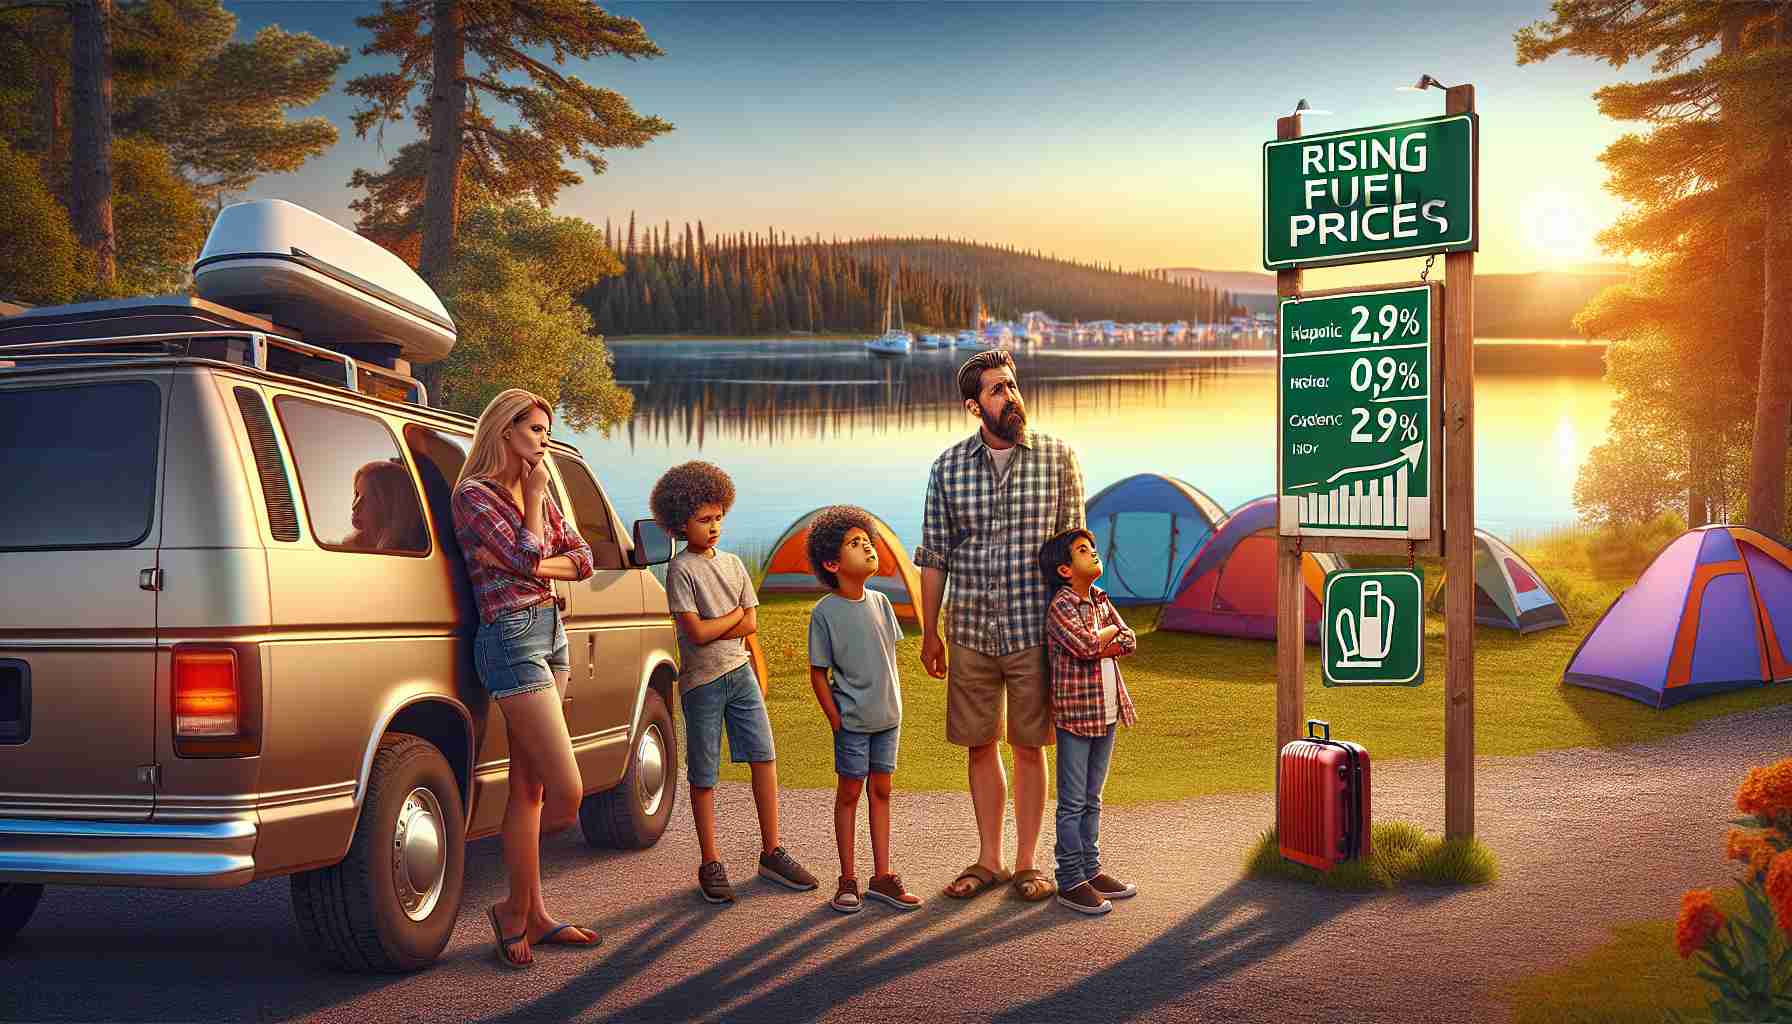 Create a realistic HD image that visually communicates the impact of rising fuel prices on summer travel plans. This can be shown by a van parked at a picturesque camping site with a family looking disheartenedly at a sign displaying hiking fuel prices. The background should depict a beautiful sunset over a lake to represent summer time. The family should consist of a Hispanic father, Caucasian mother, and their two children, who are a black daughter and a middle-eastern son.